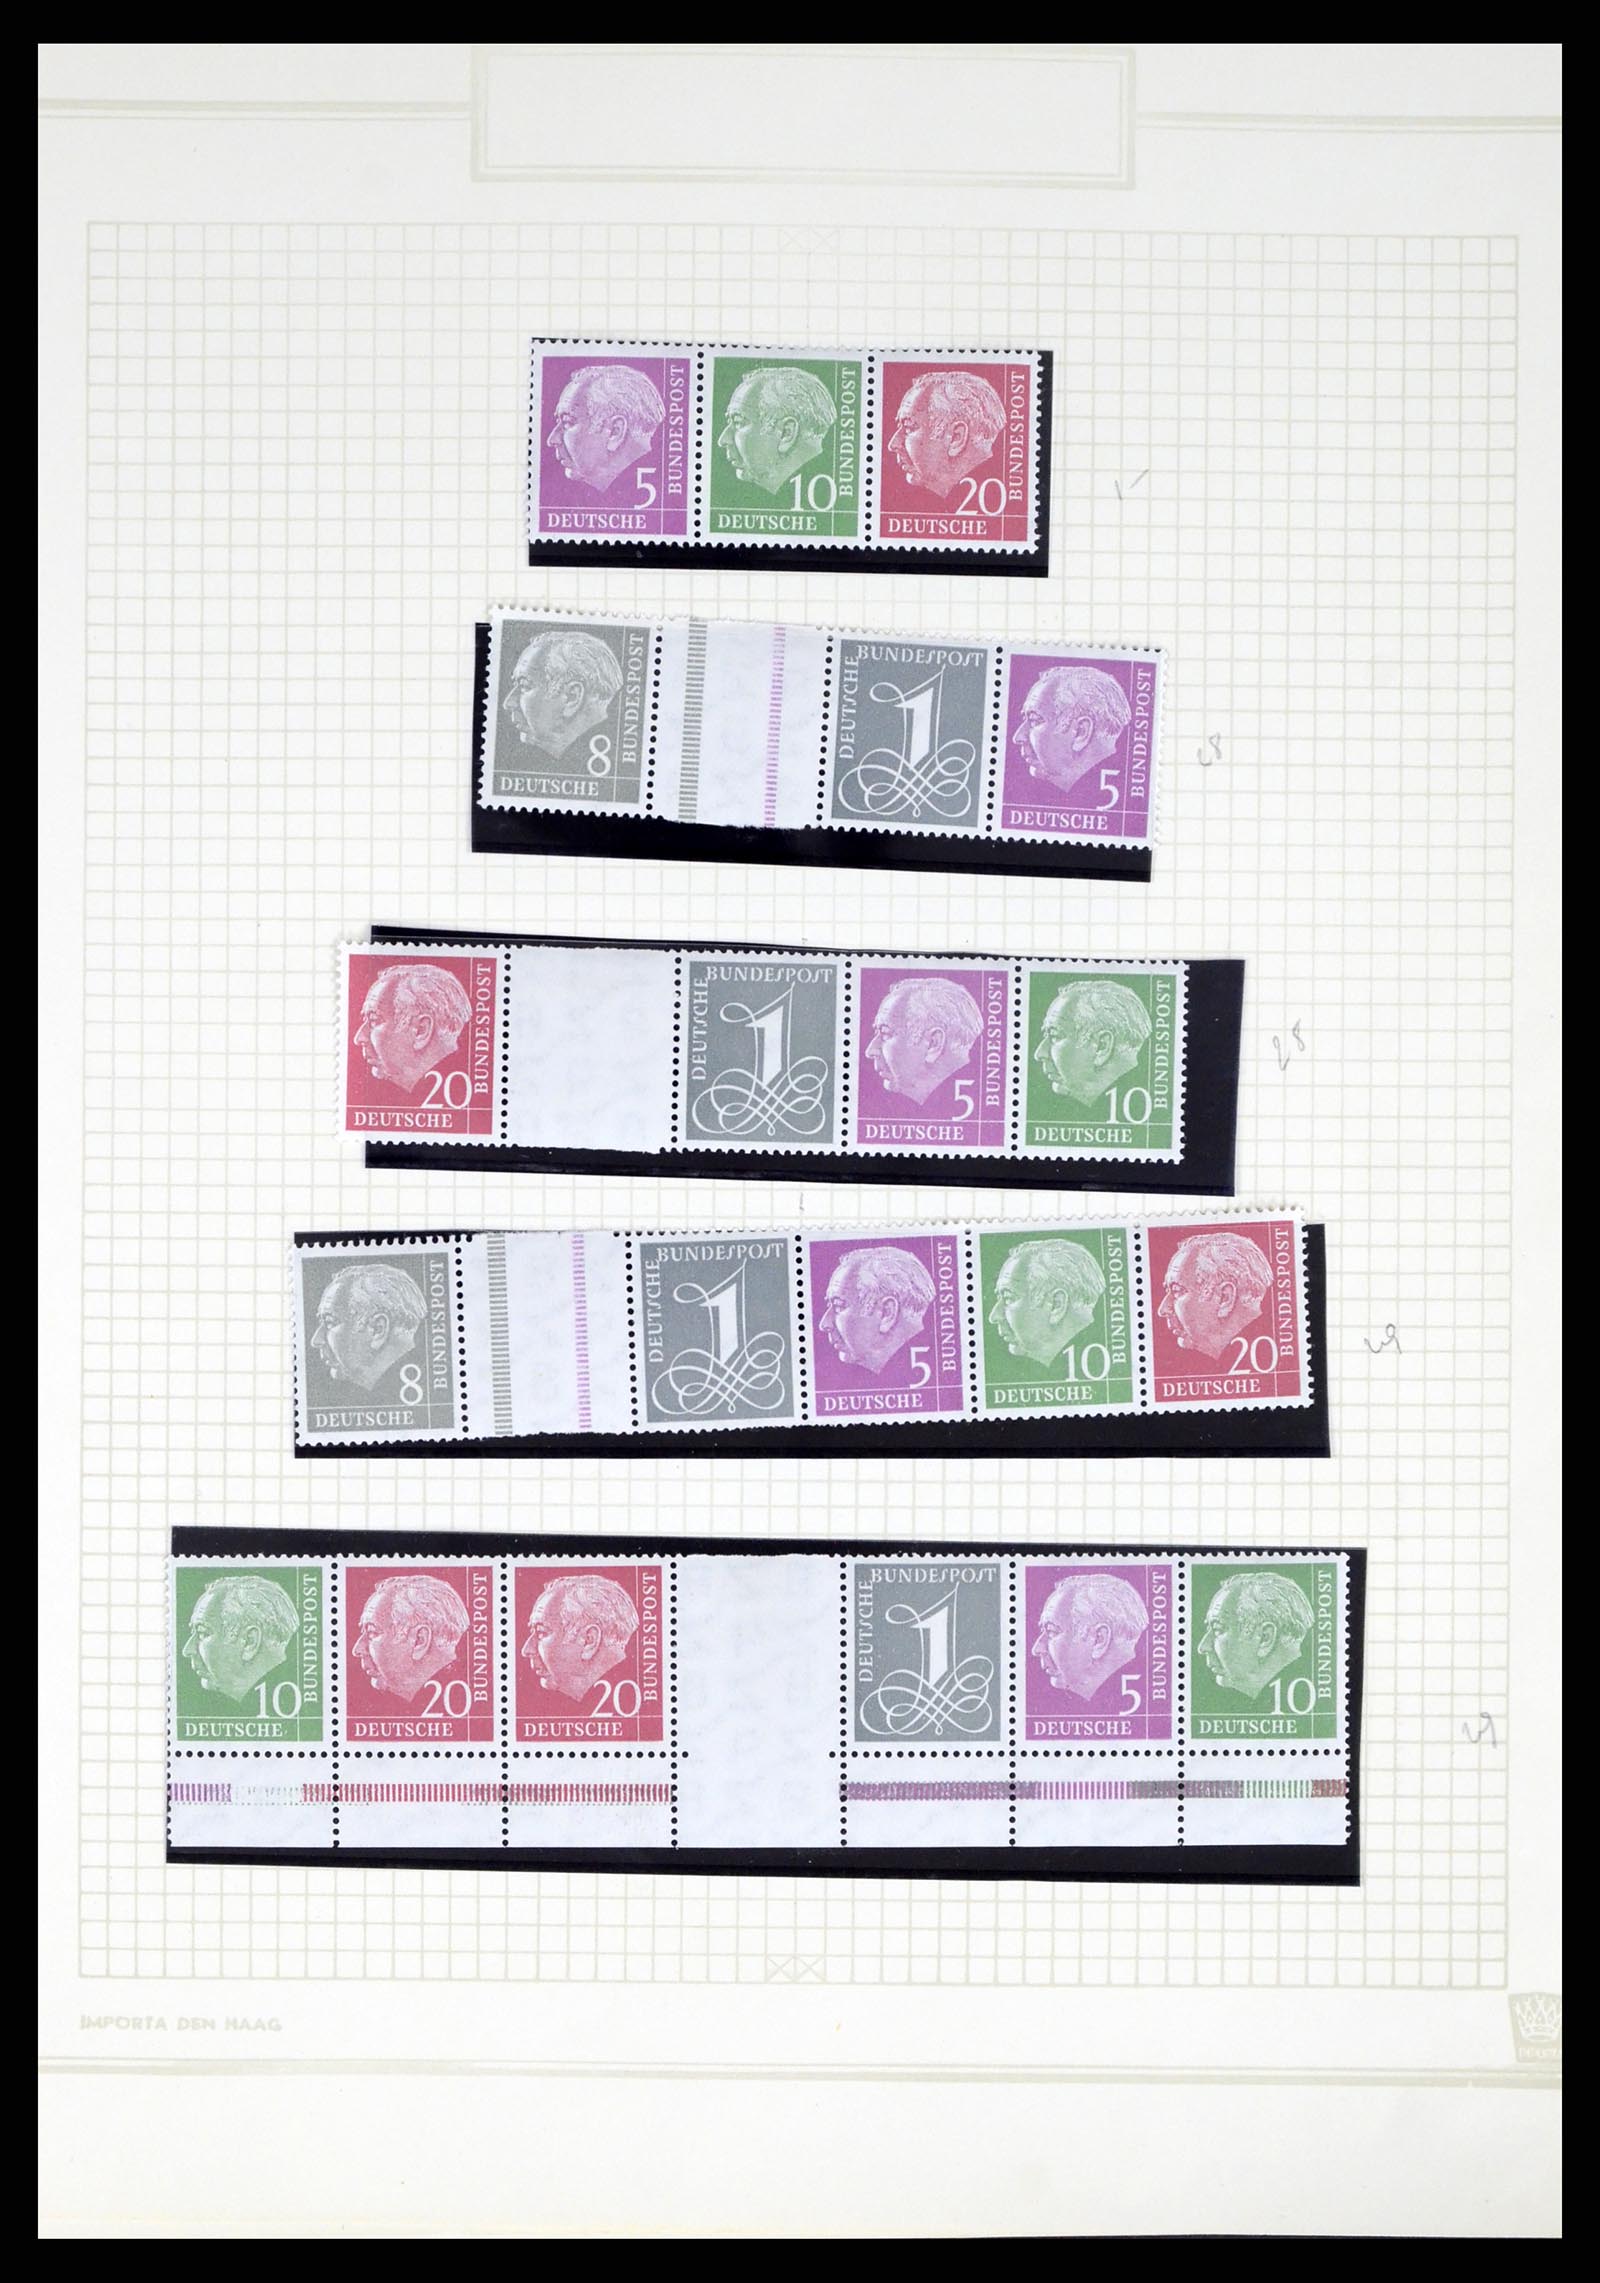 37354 046 - Stamp collection 37354 Bundespost and Berlin 1955-2000.